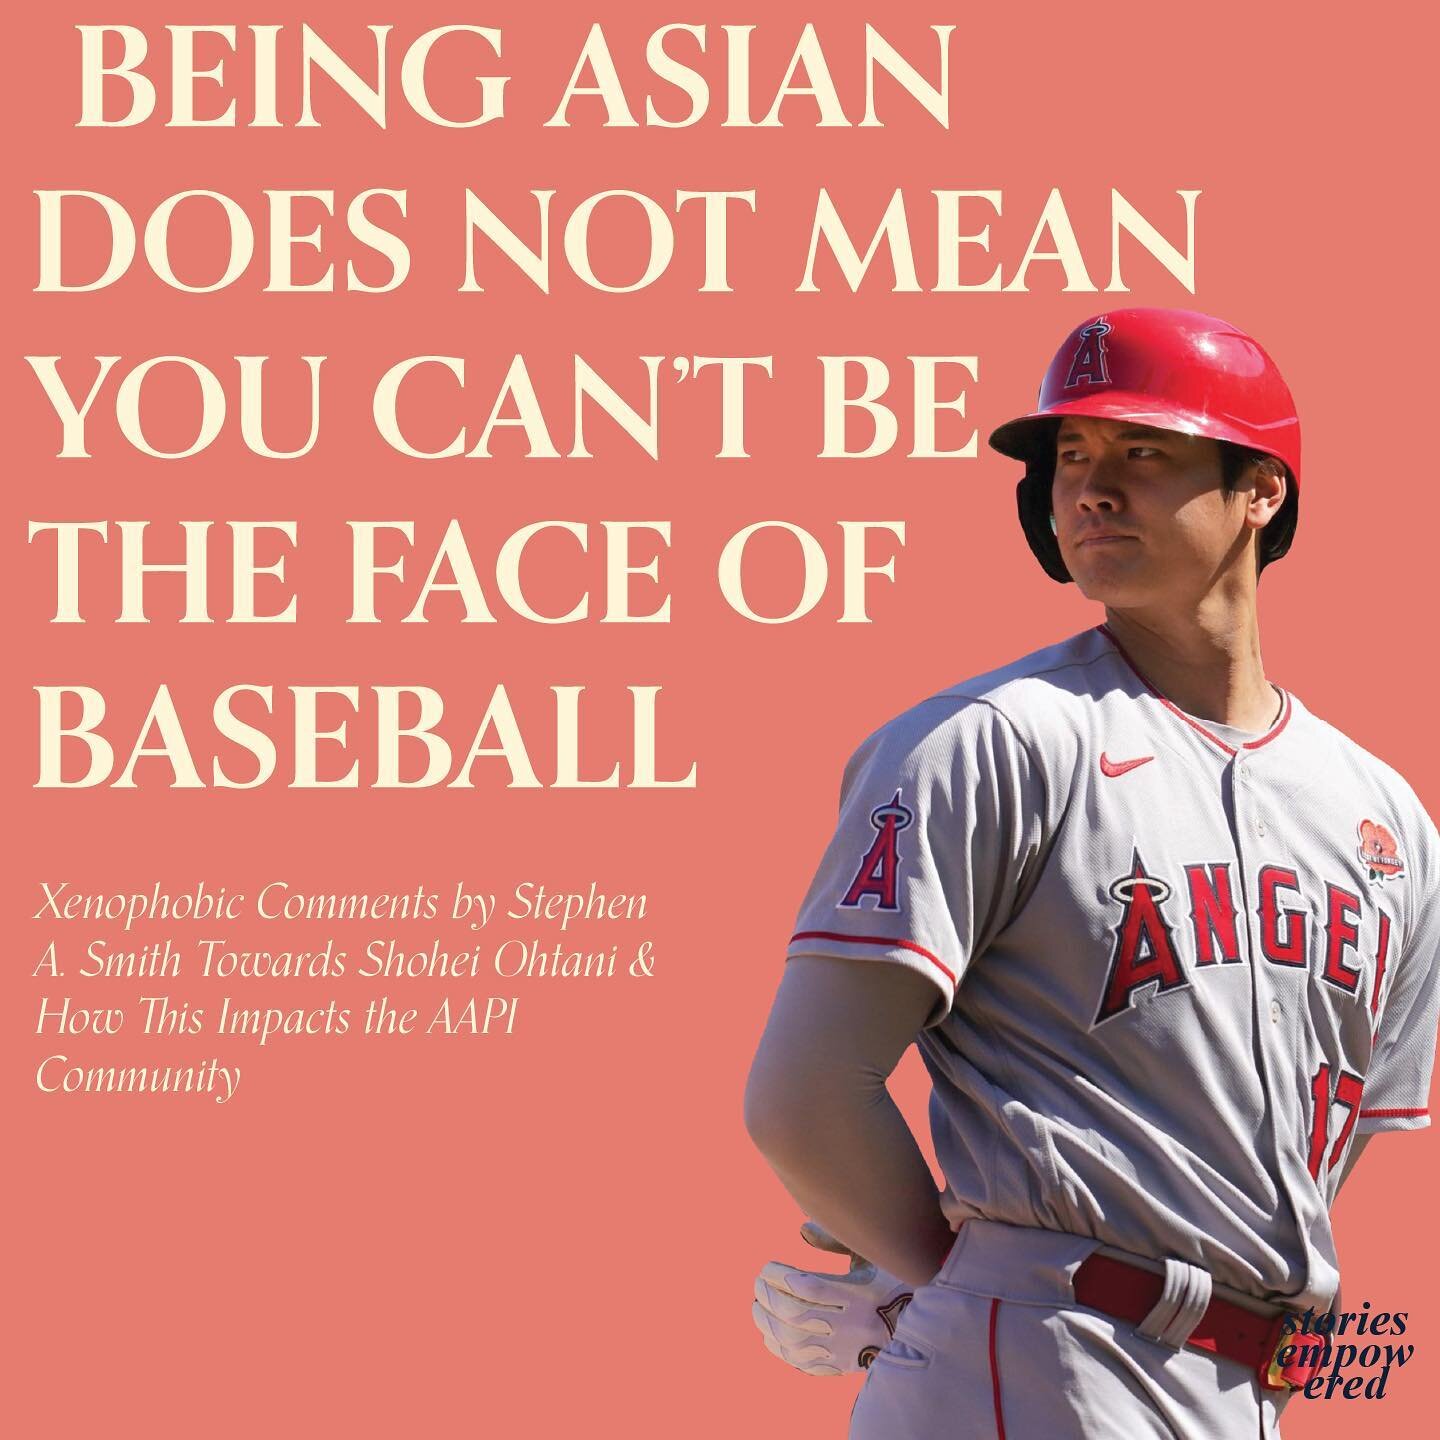 Being Asian Does Not Mean You Can&rsquo;t Be the Face of Baseball
@stephenasmith 

In Monday's segment on ESPN&rsquo;s morning talk show &ldquo;First Take&rdquo; Stephen A. Smith said that Ohtani couldn&rsquo;t be the face of the sport because he use